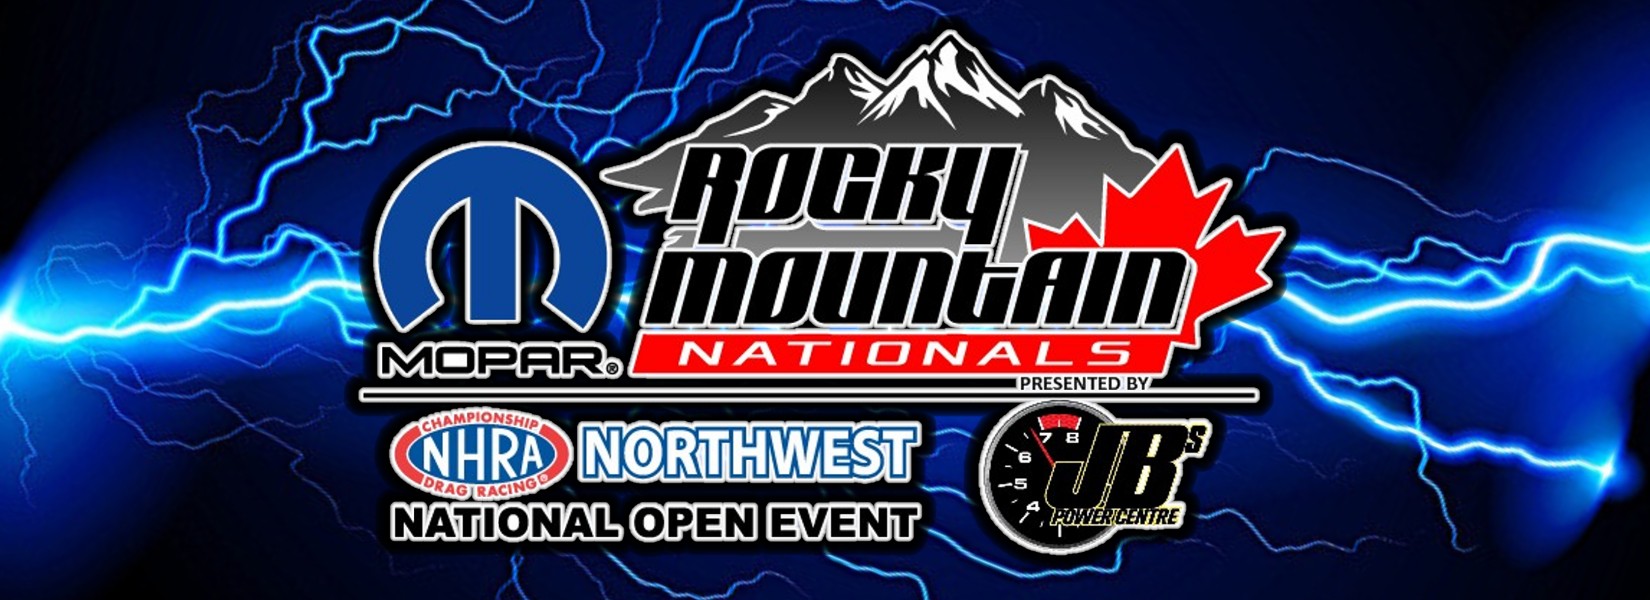 630 CHED Rocky Mountain Nationals Giveaway Edmonton Globalnews.ca